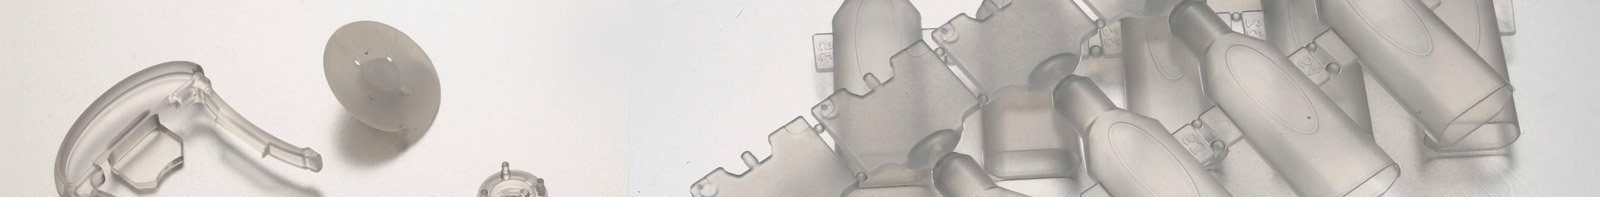 ISO 7 cleanroom plastic injection moulding for medical devices |Innovamed